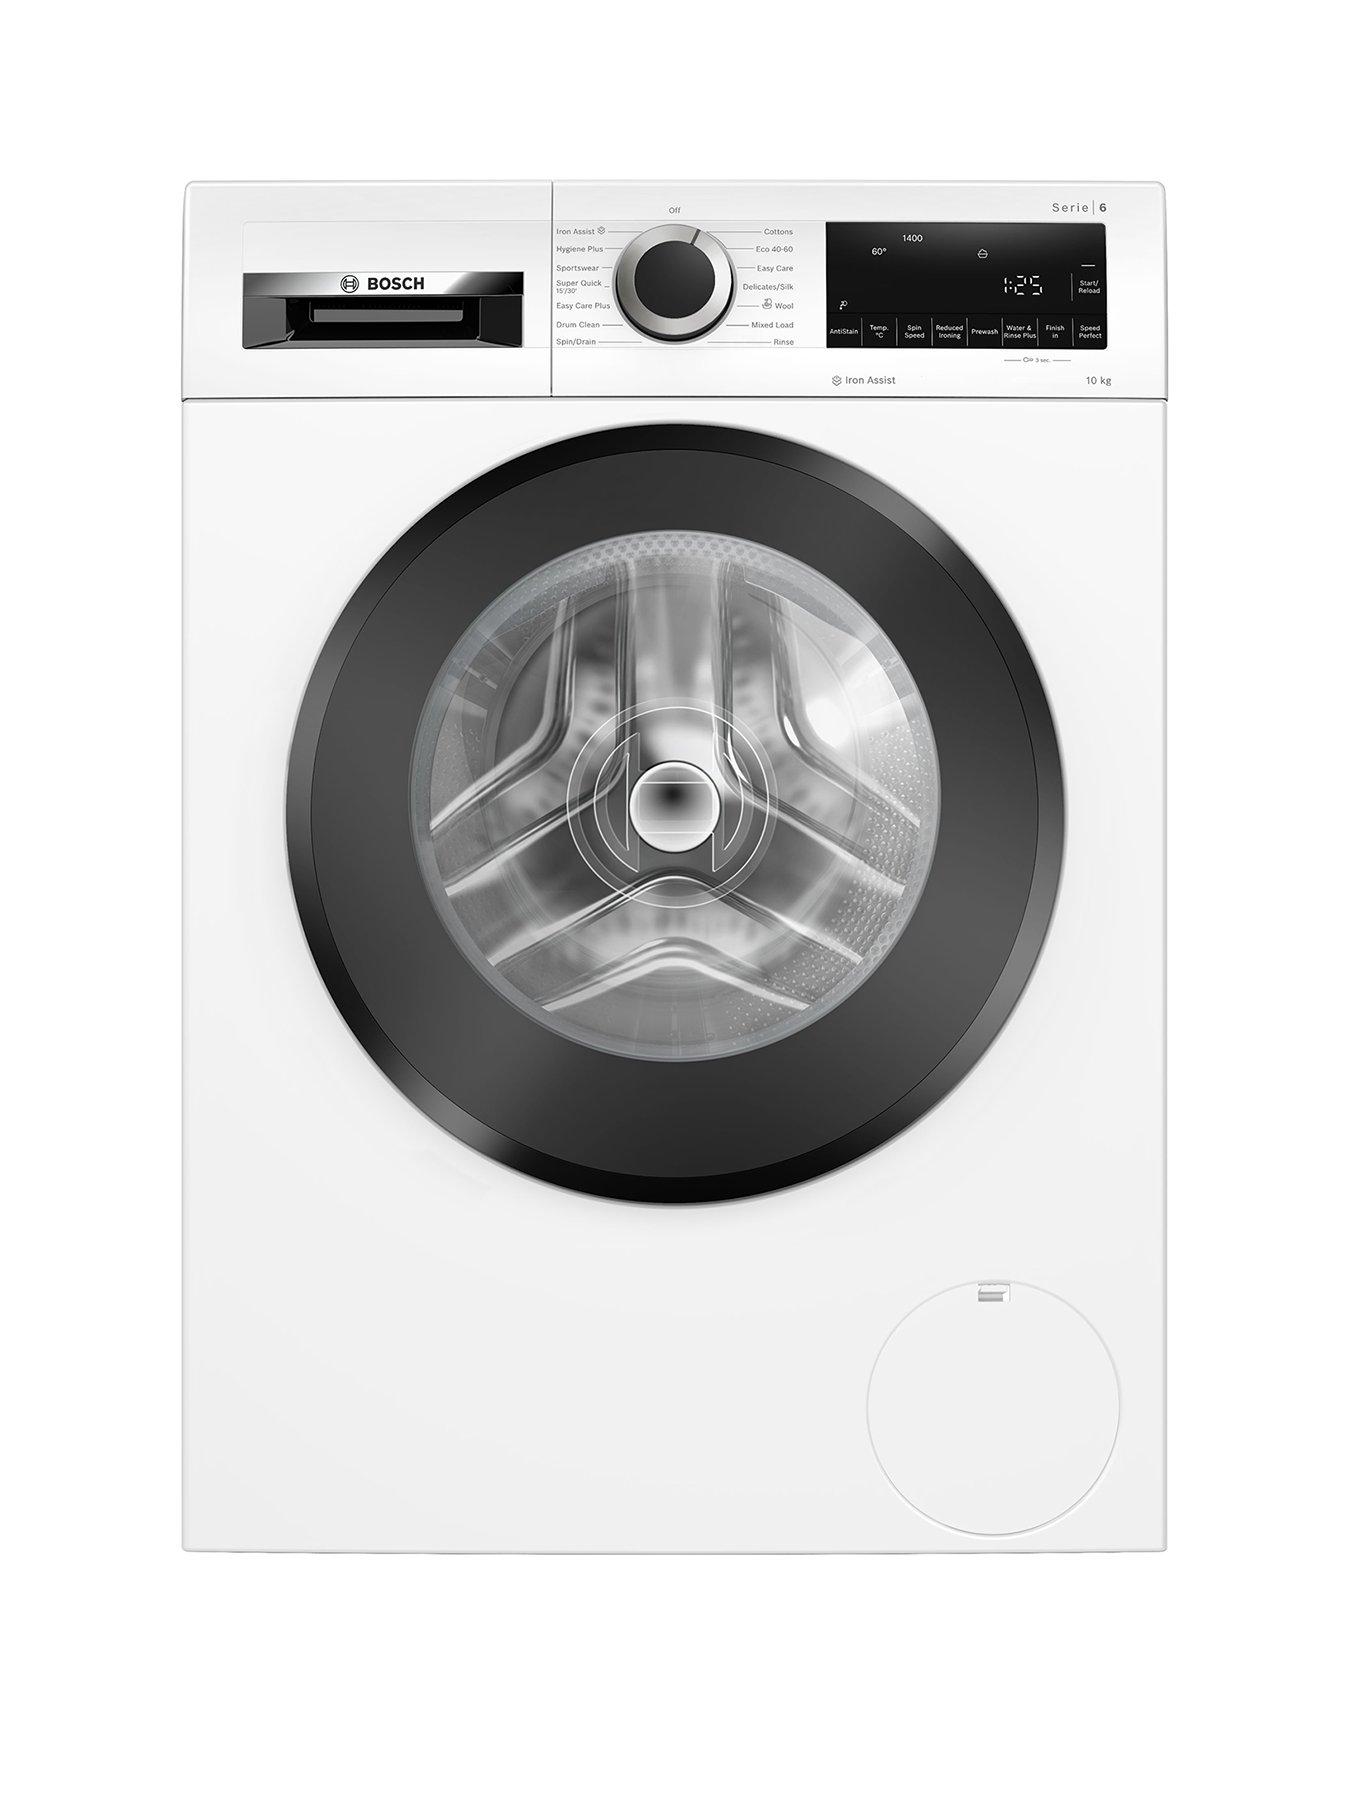 Bosch Series 6 Wgg254Z0Gb 10Kg Load, 1400Rpm Spin Freestanding Washing Machine - Iron Assist, Anti Stain, Active Water Plus, Eco Silence Drive - White